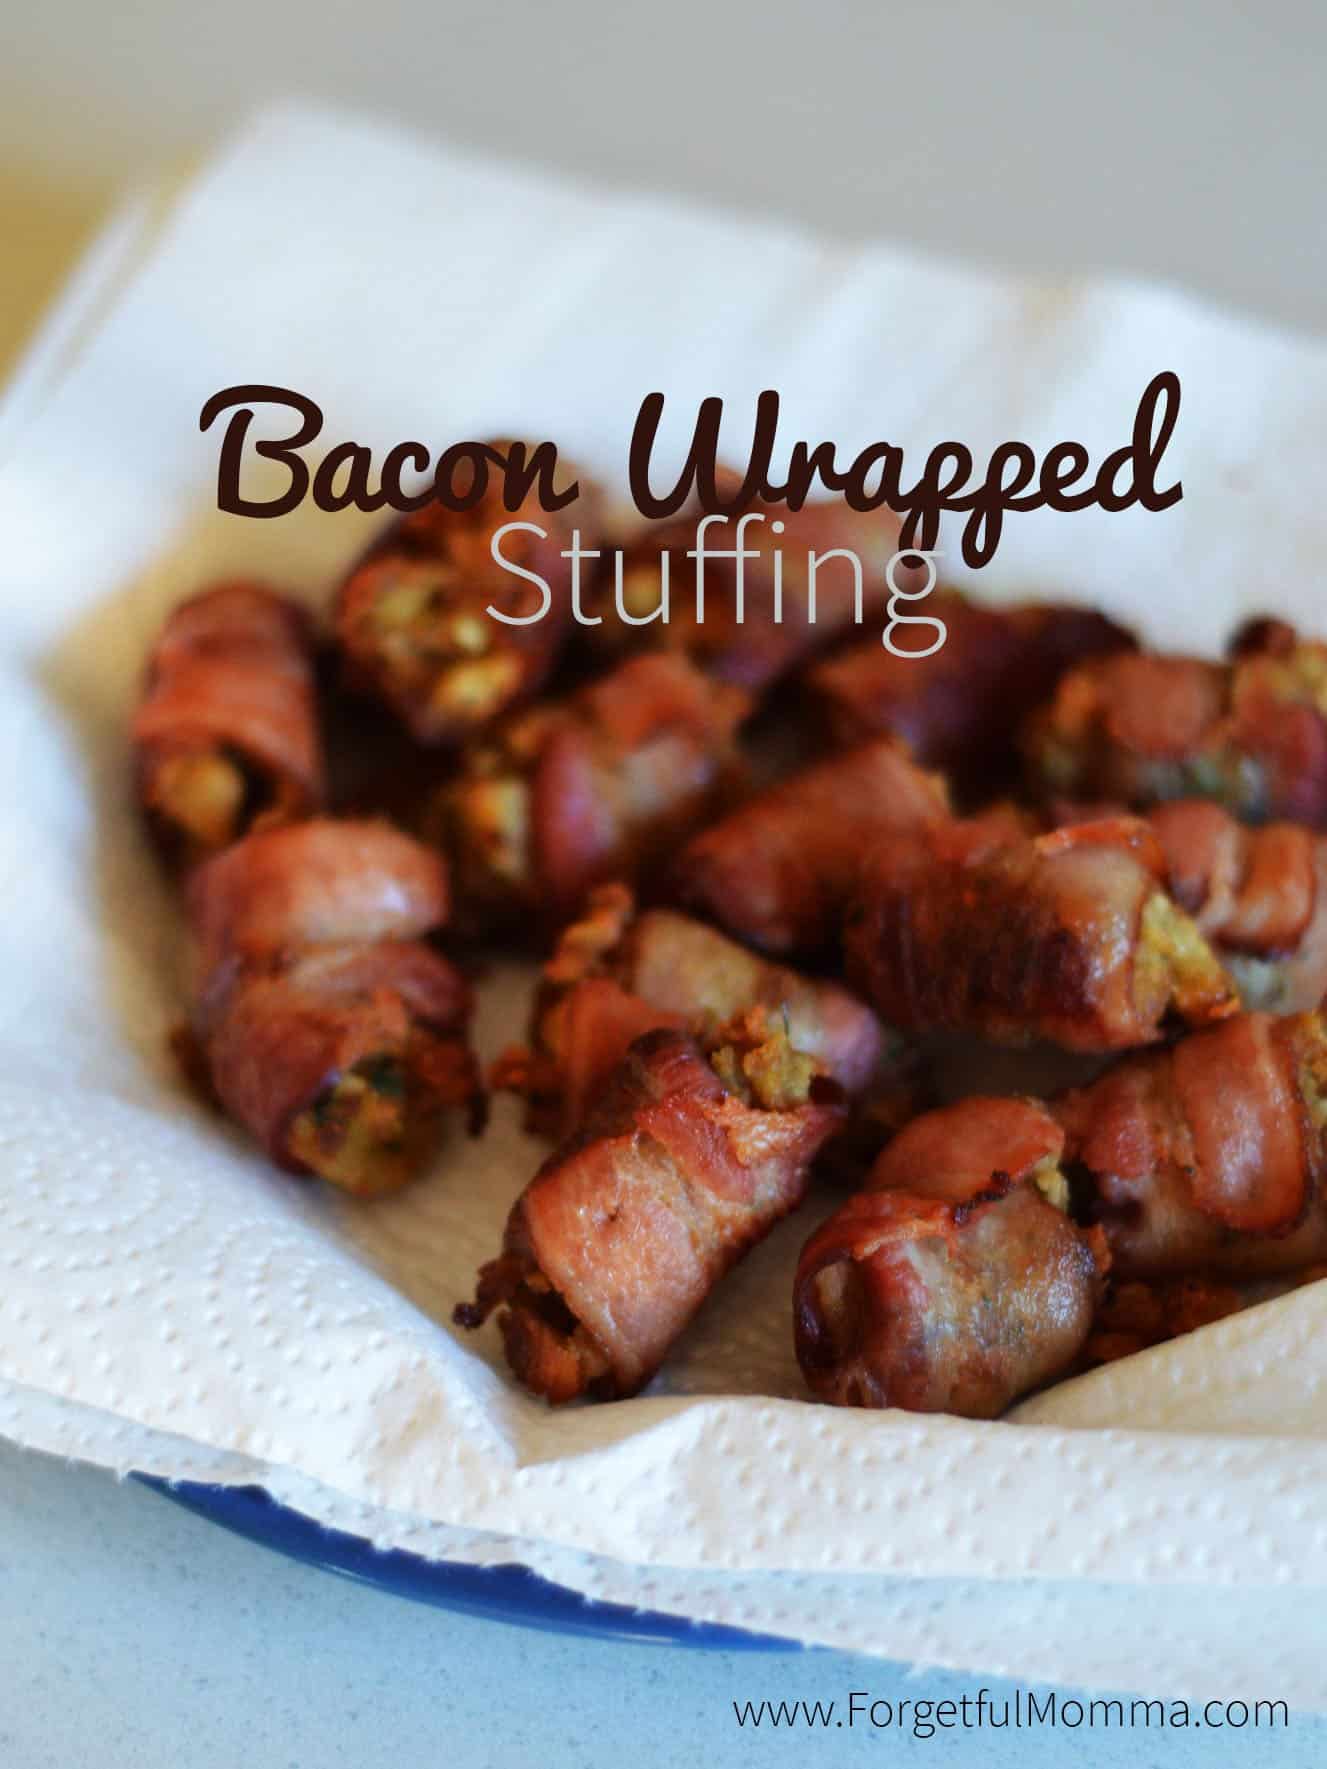 Bacon Wrapped Stuffing - Forgetful Momma